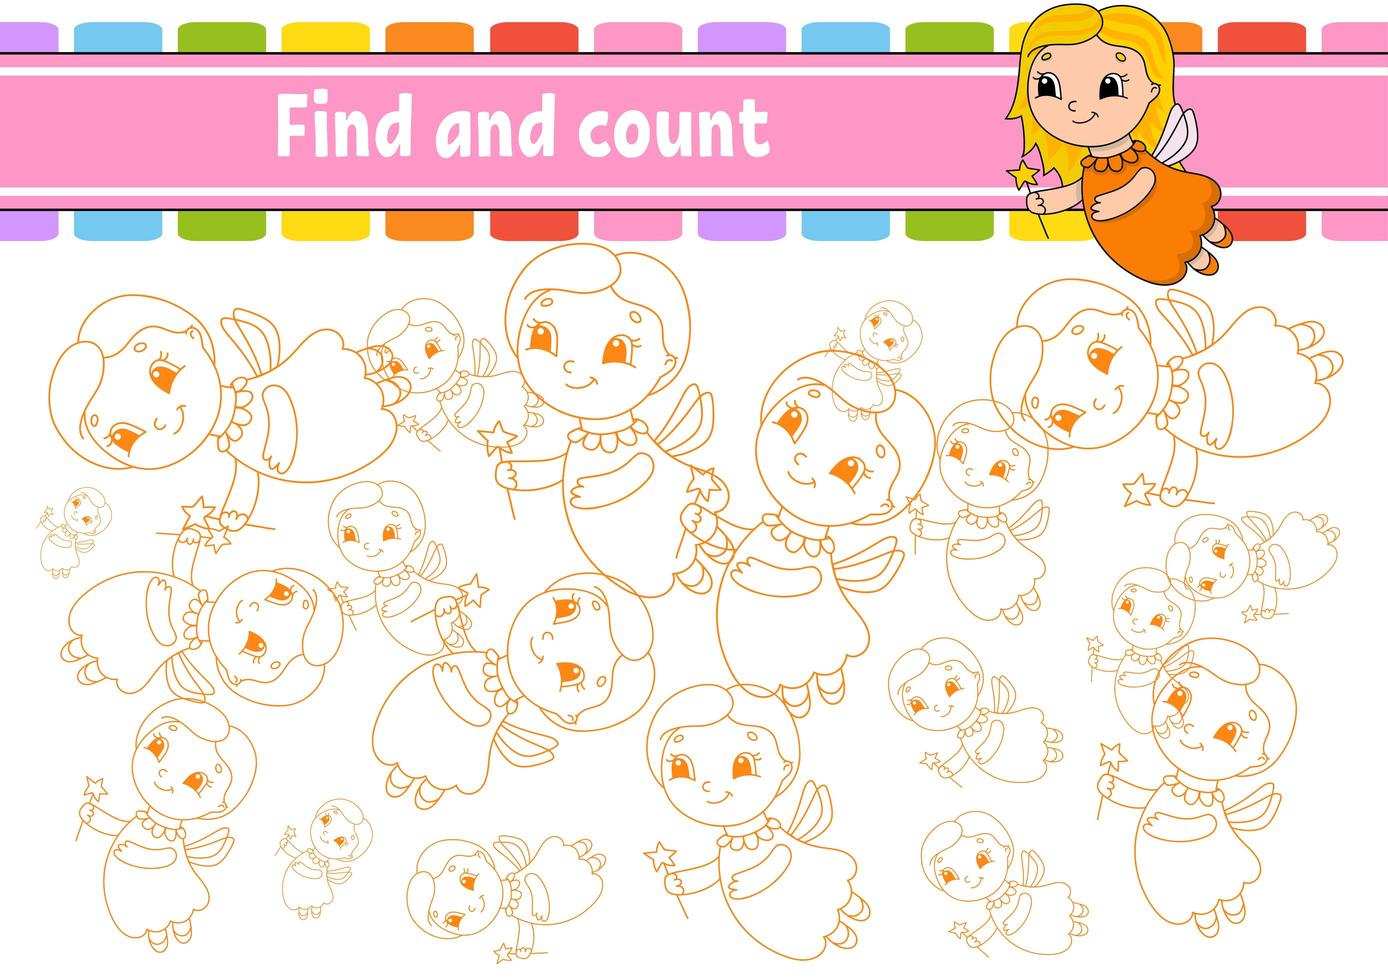 Find and count. Tooth Fairy. Education developing worksheet. Activity page. Puzzle game for children. Logical thinking training. Isolated vector illustration. Cartoon character.